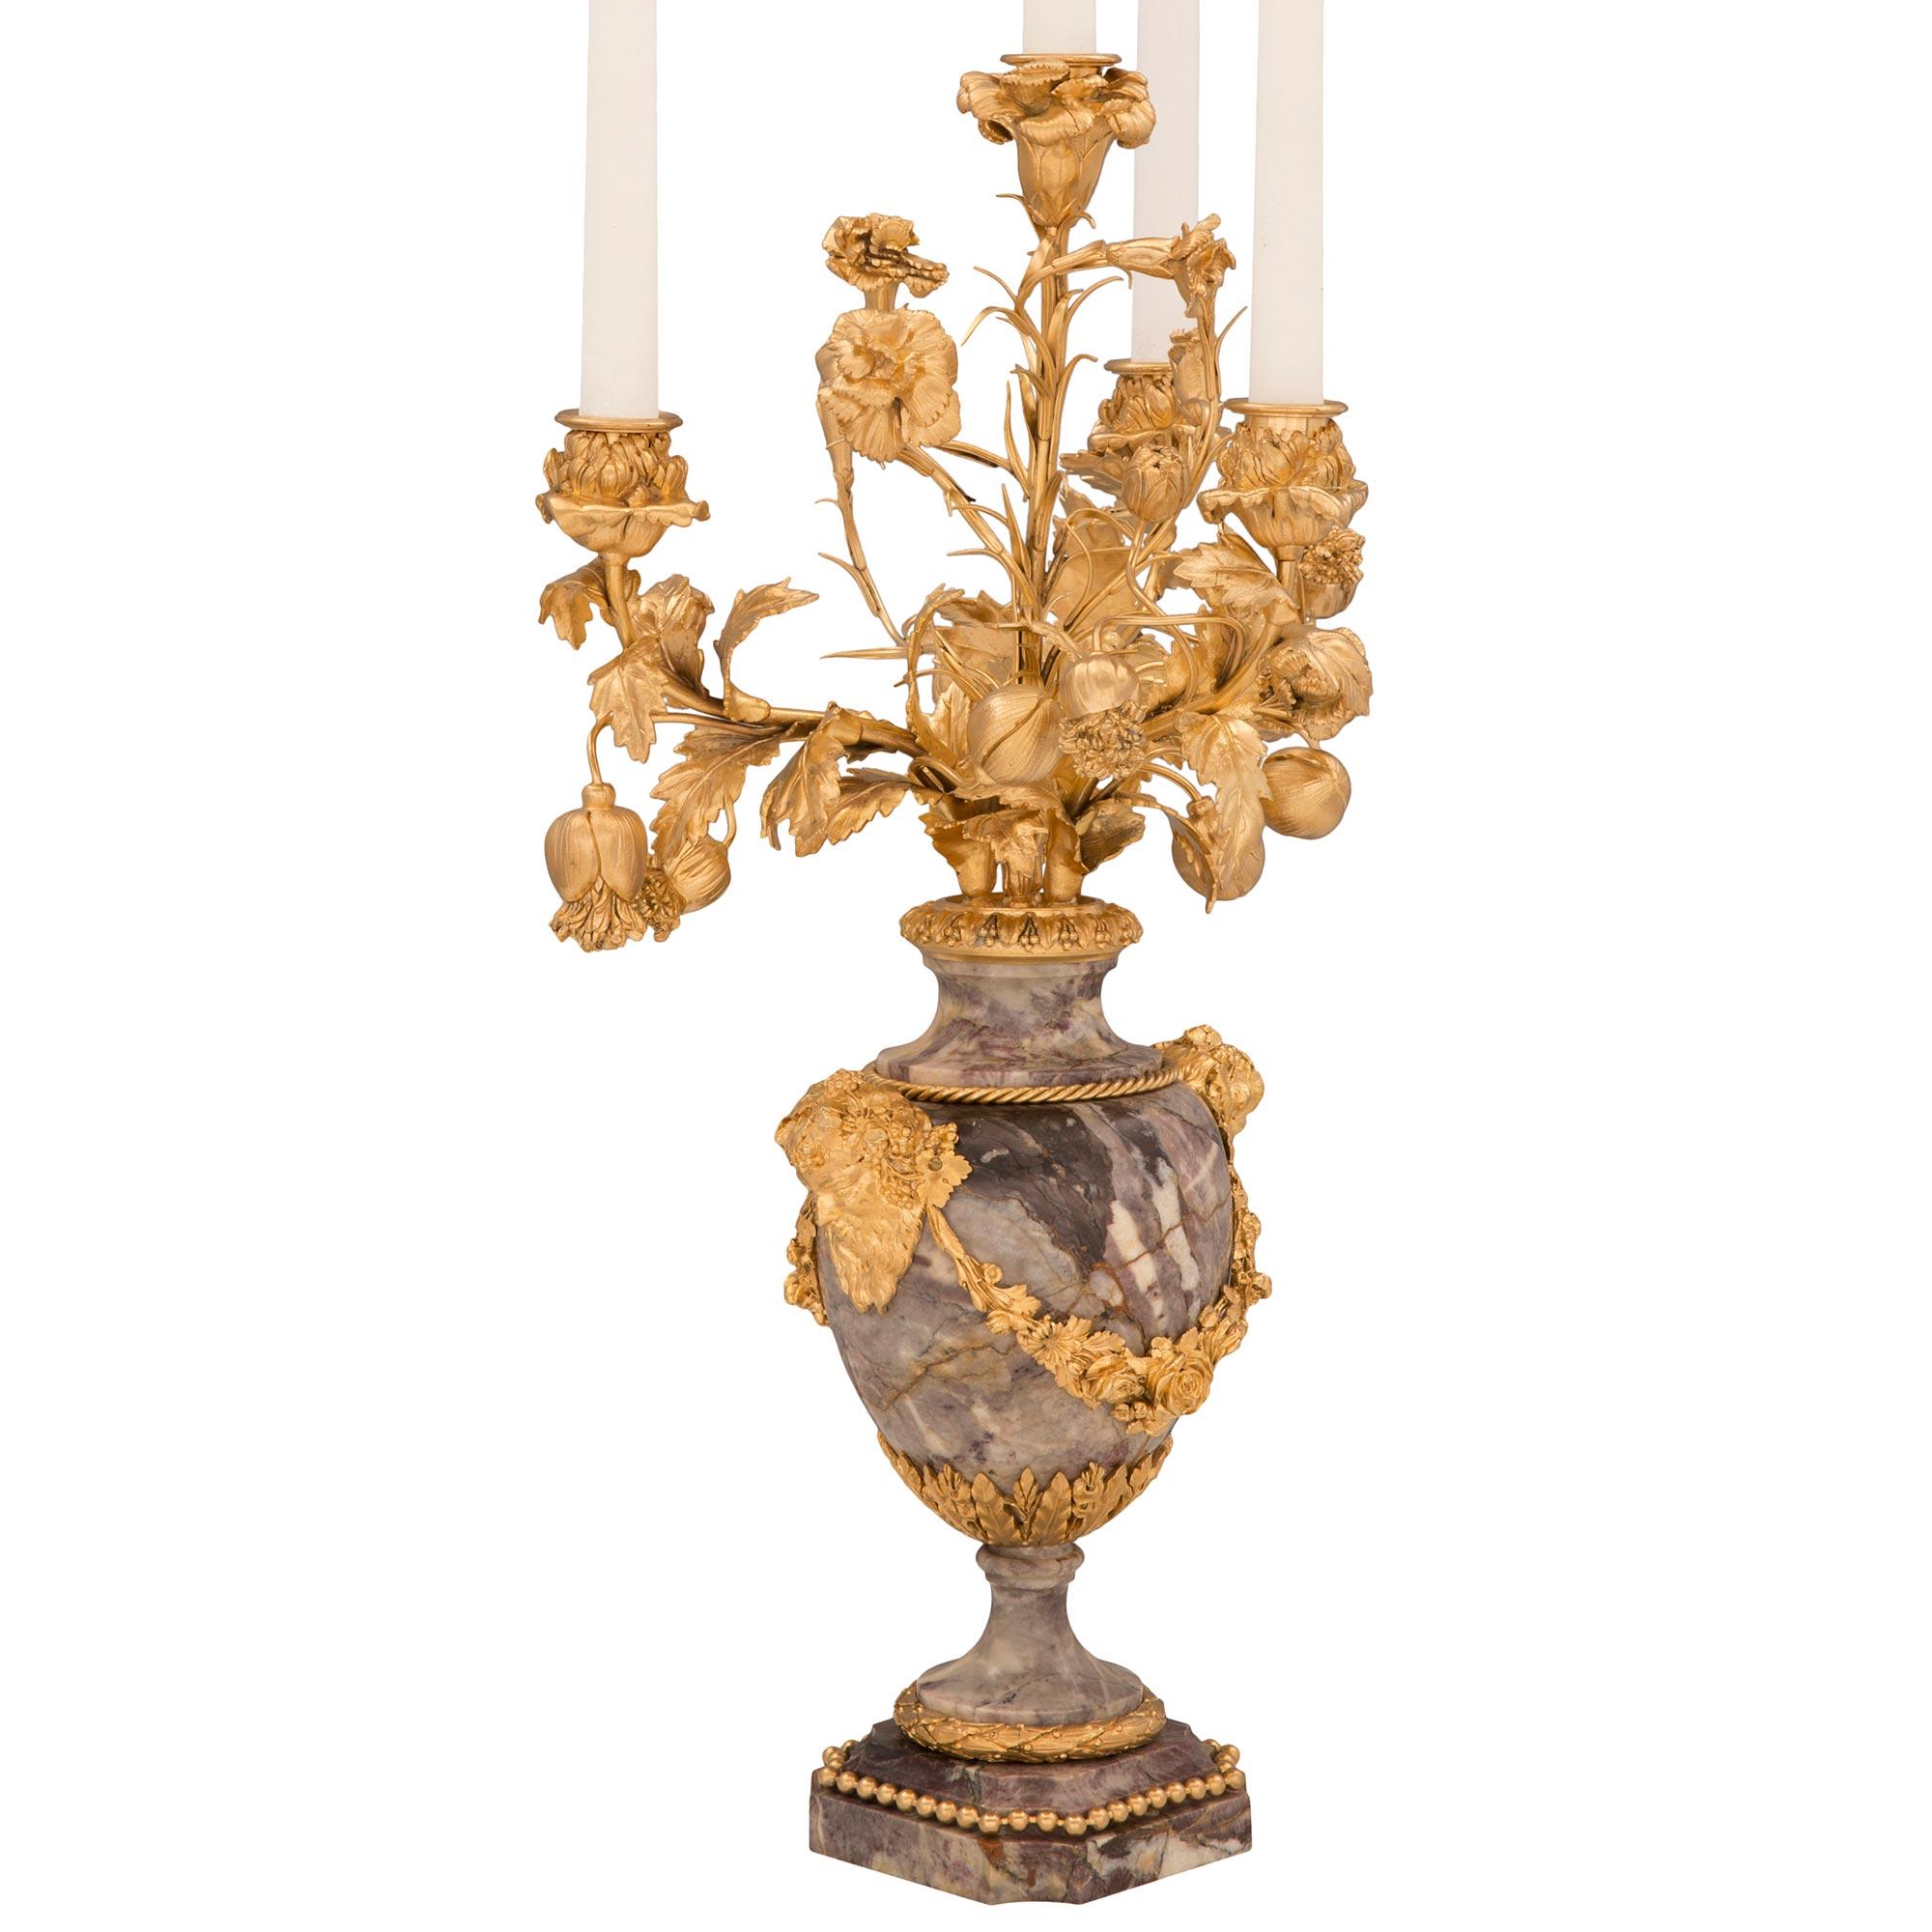 A superb and extremely high quality pair of French 19th century Louis XVI st. Belle Époque period Brèche Violette marble and ormolu candelabras. Each candelabra is raised by a square base with concave corners, a stepped design adorned with wrap